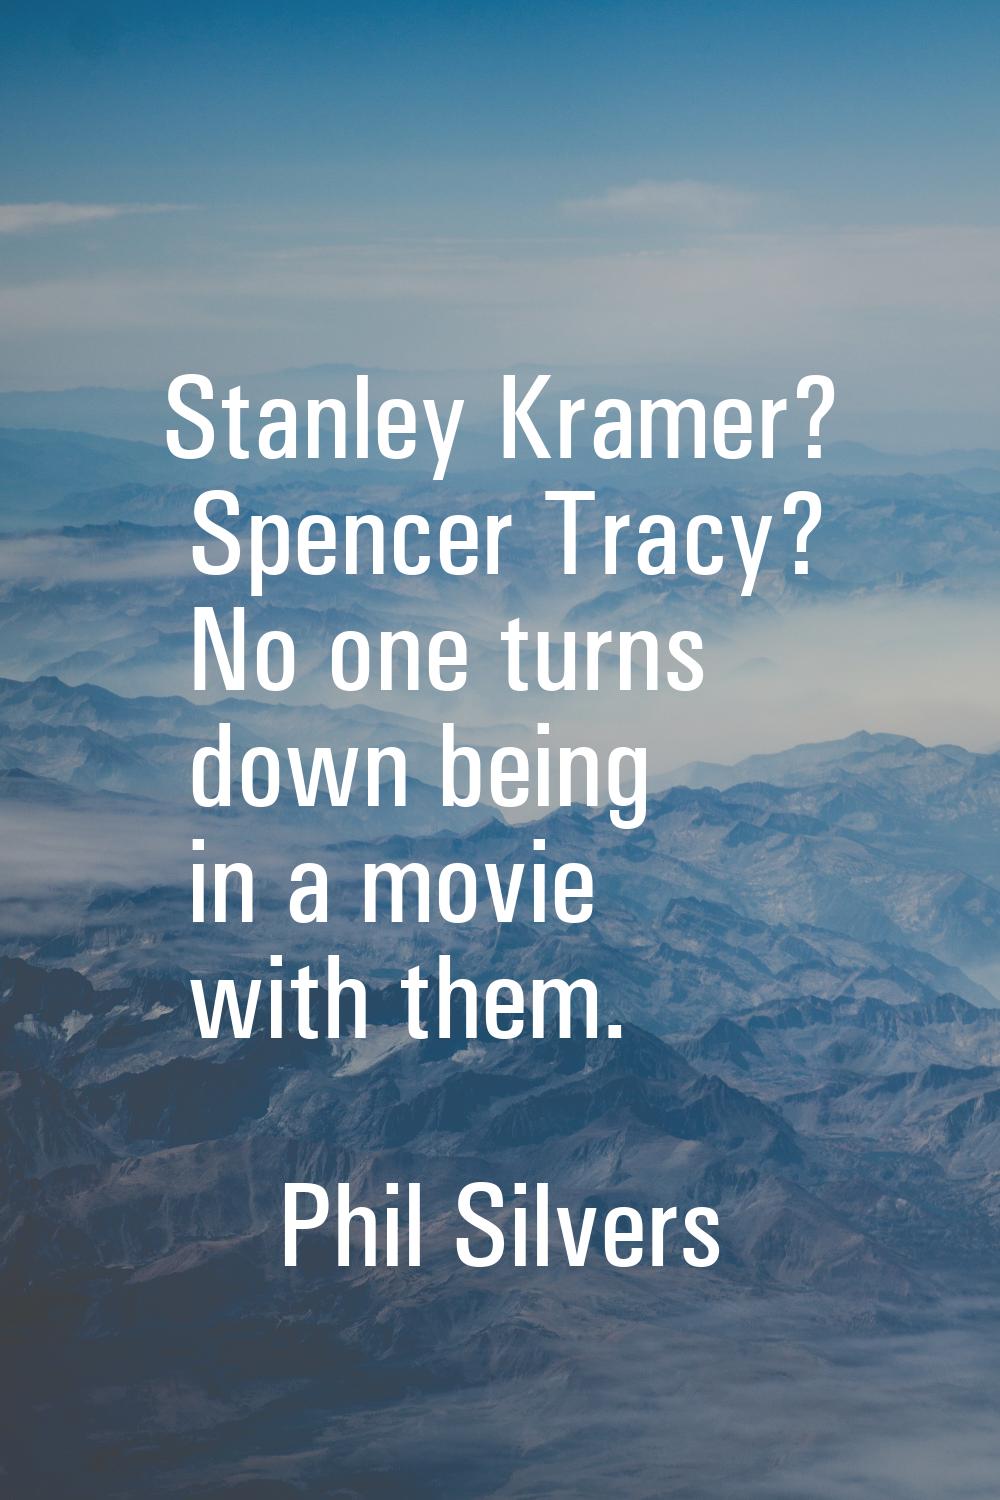 Stanley Kramer? Spencer Tracy? No one turns down being in a movie with them.